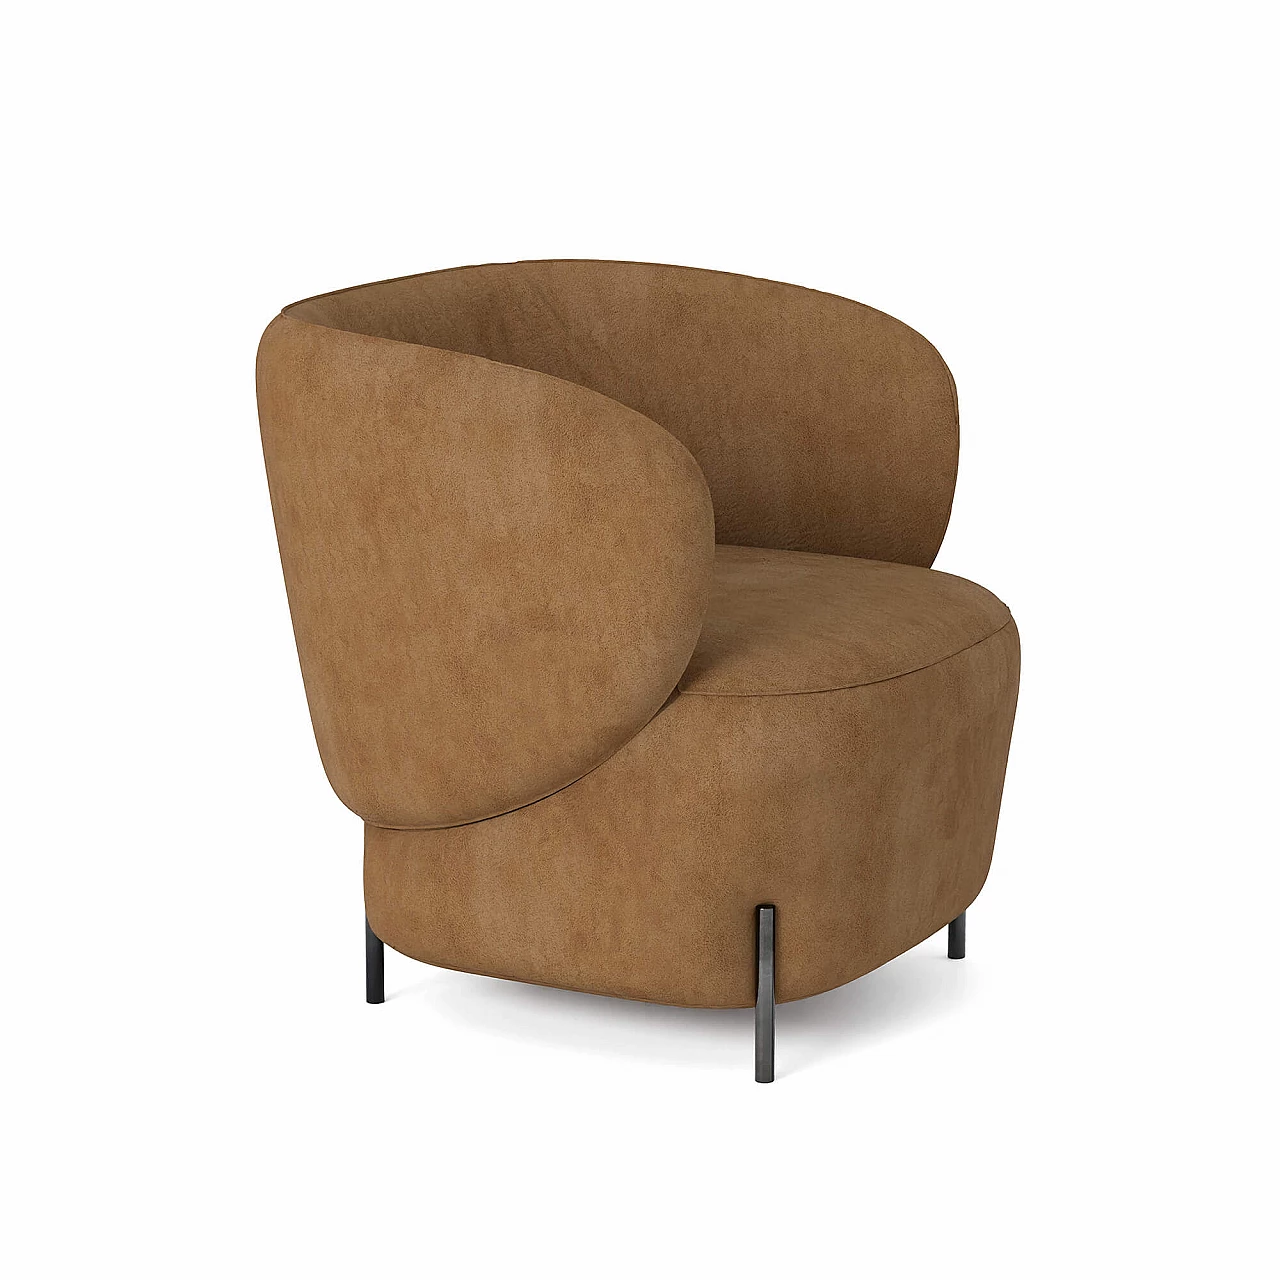 LaBimba suede armchair by Dominika Mala for spHaus, 2021 1